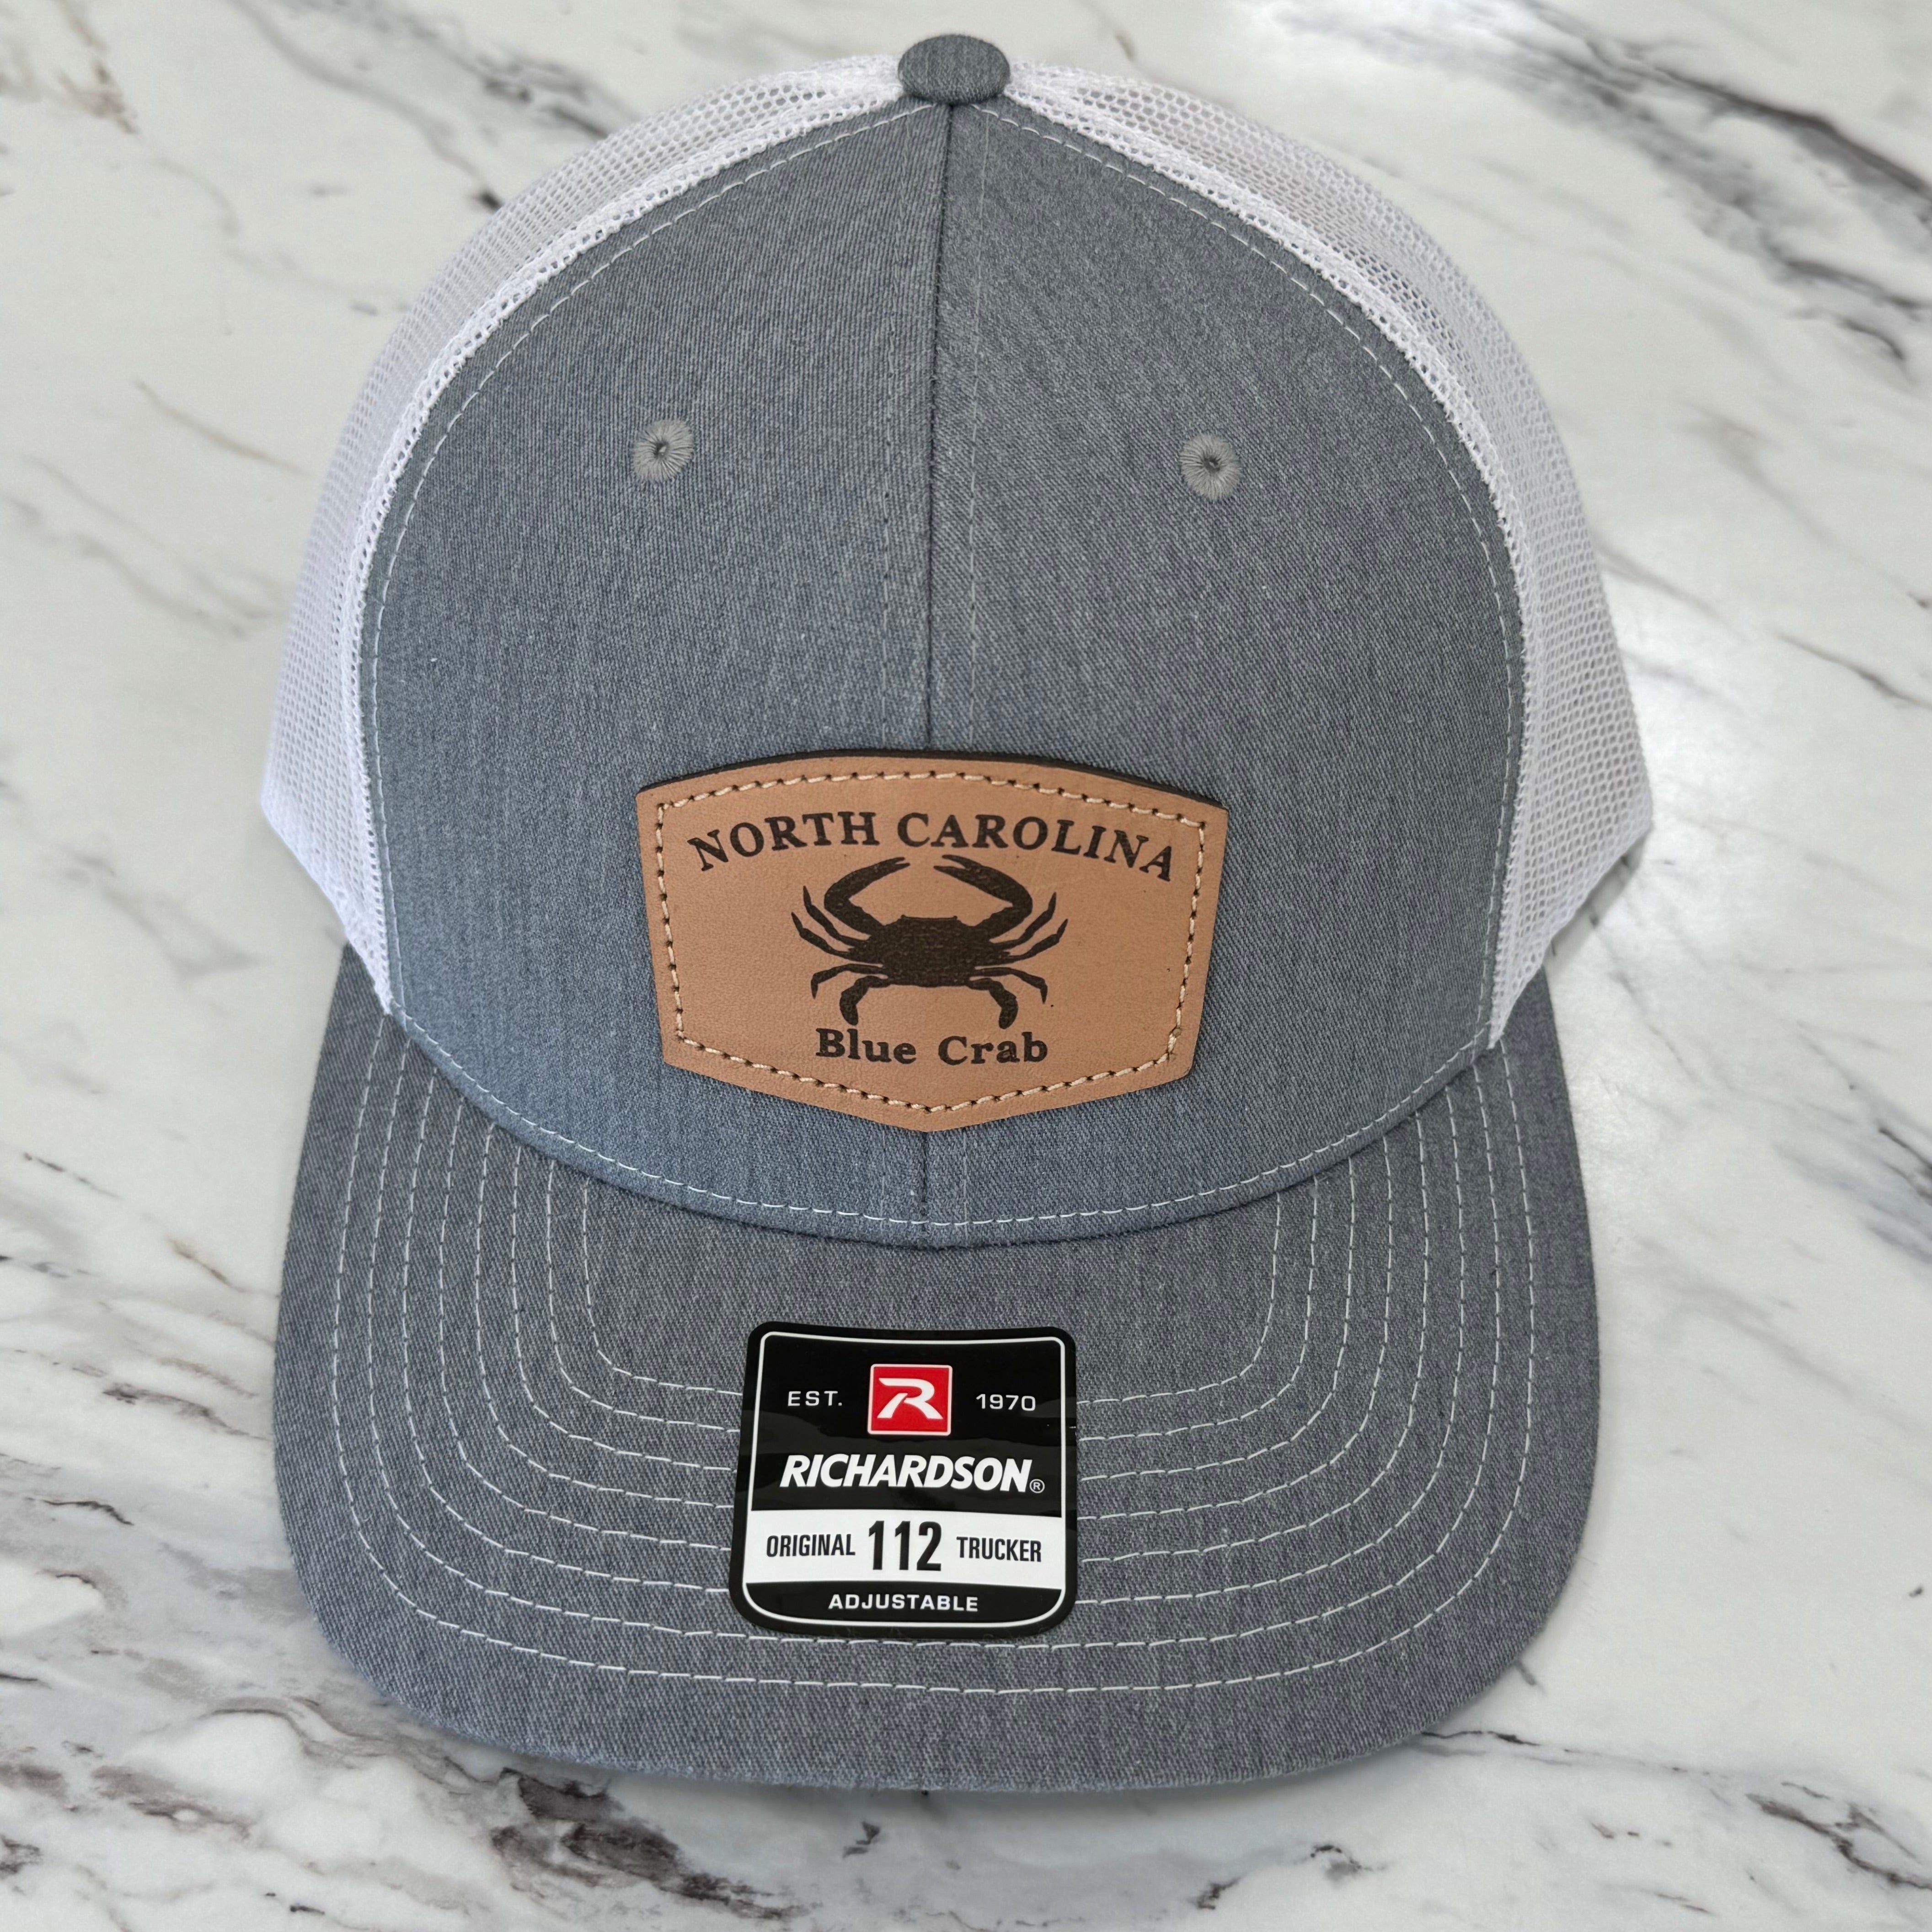 White and grey hat with leather emblem that has a blue crab and North Carolina written on it